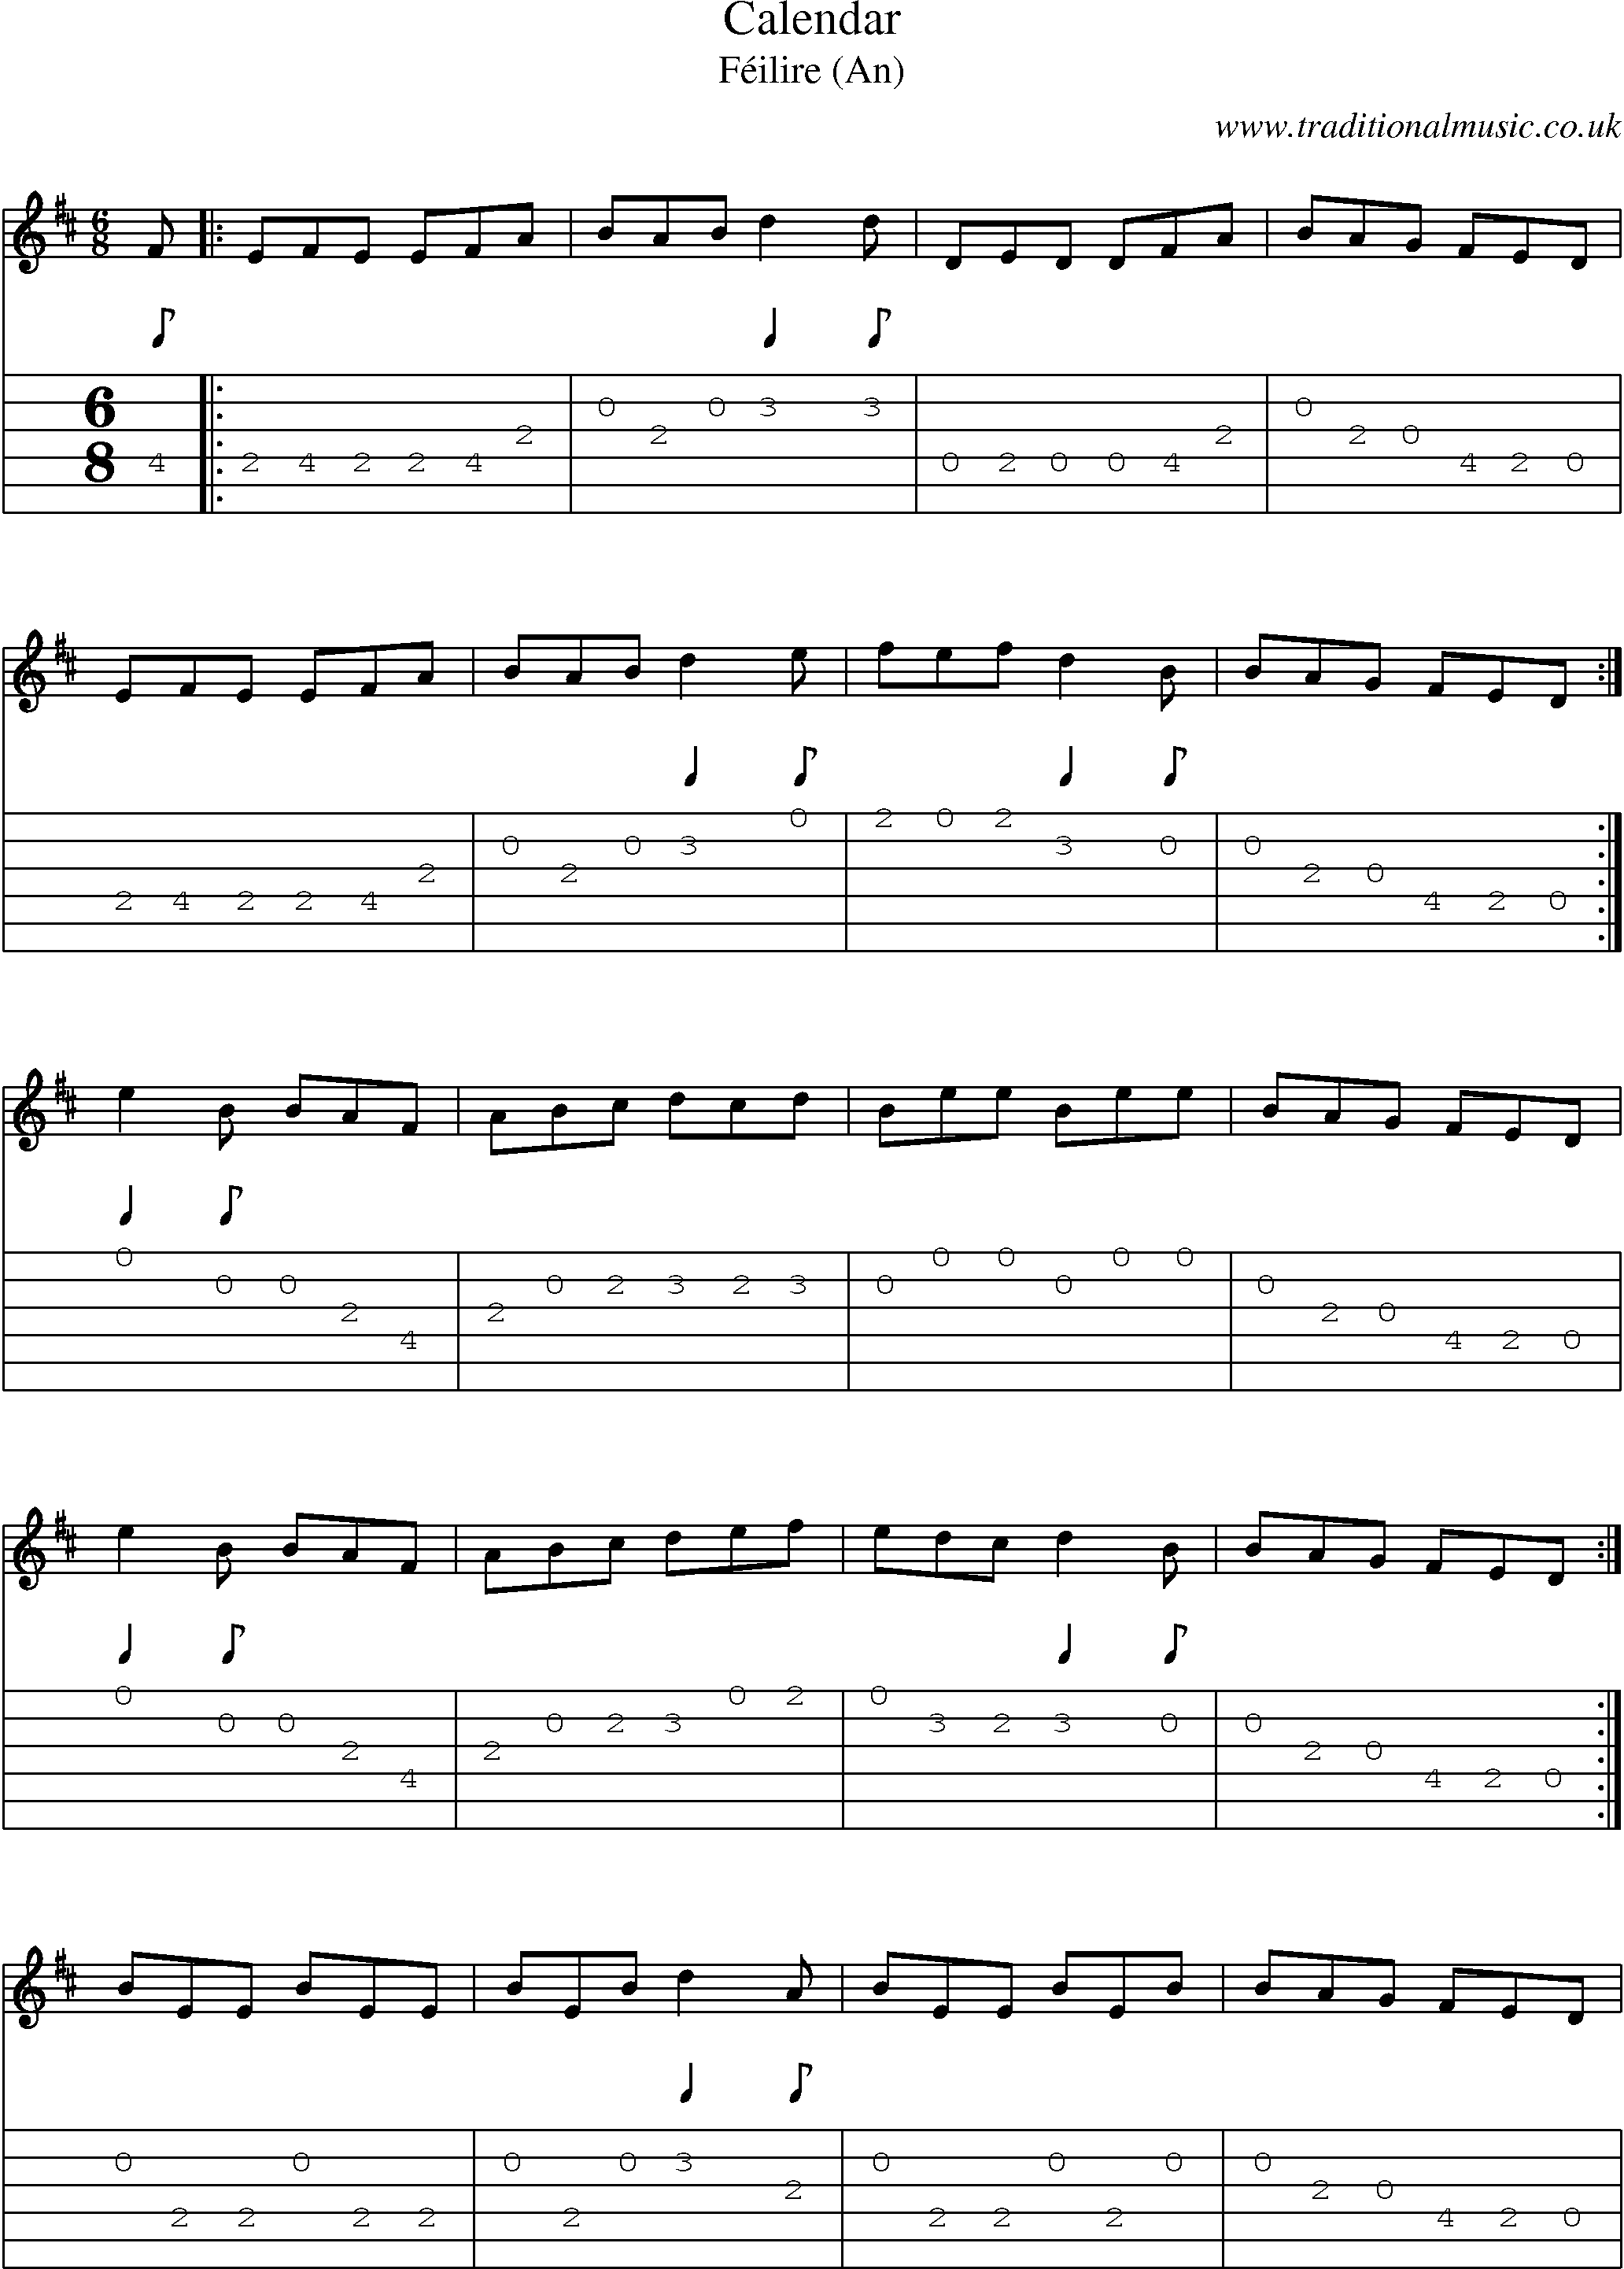 Music Score and Guitar Tabs for Calendar